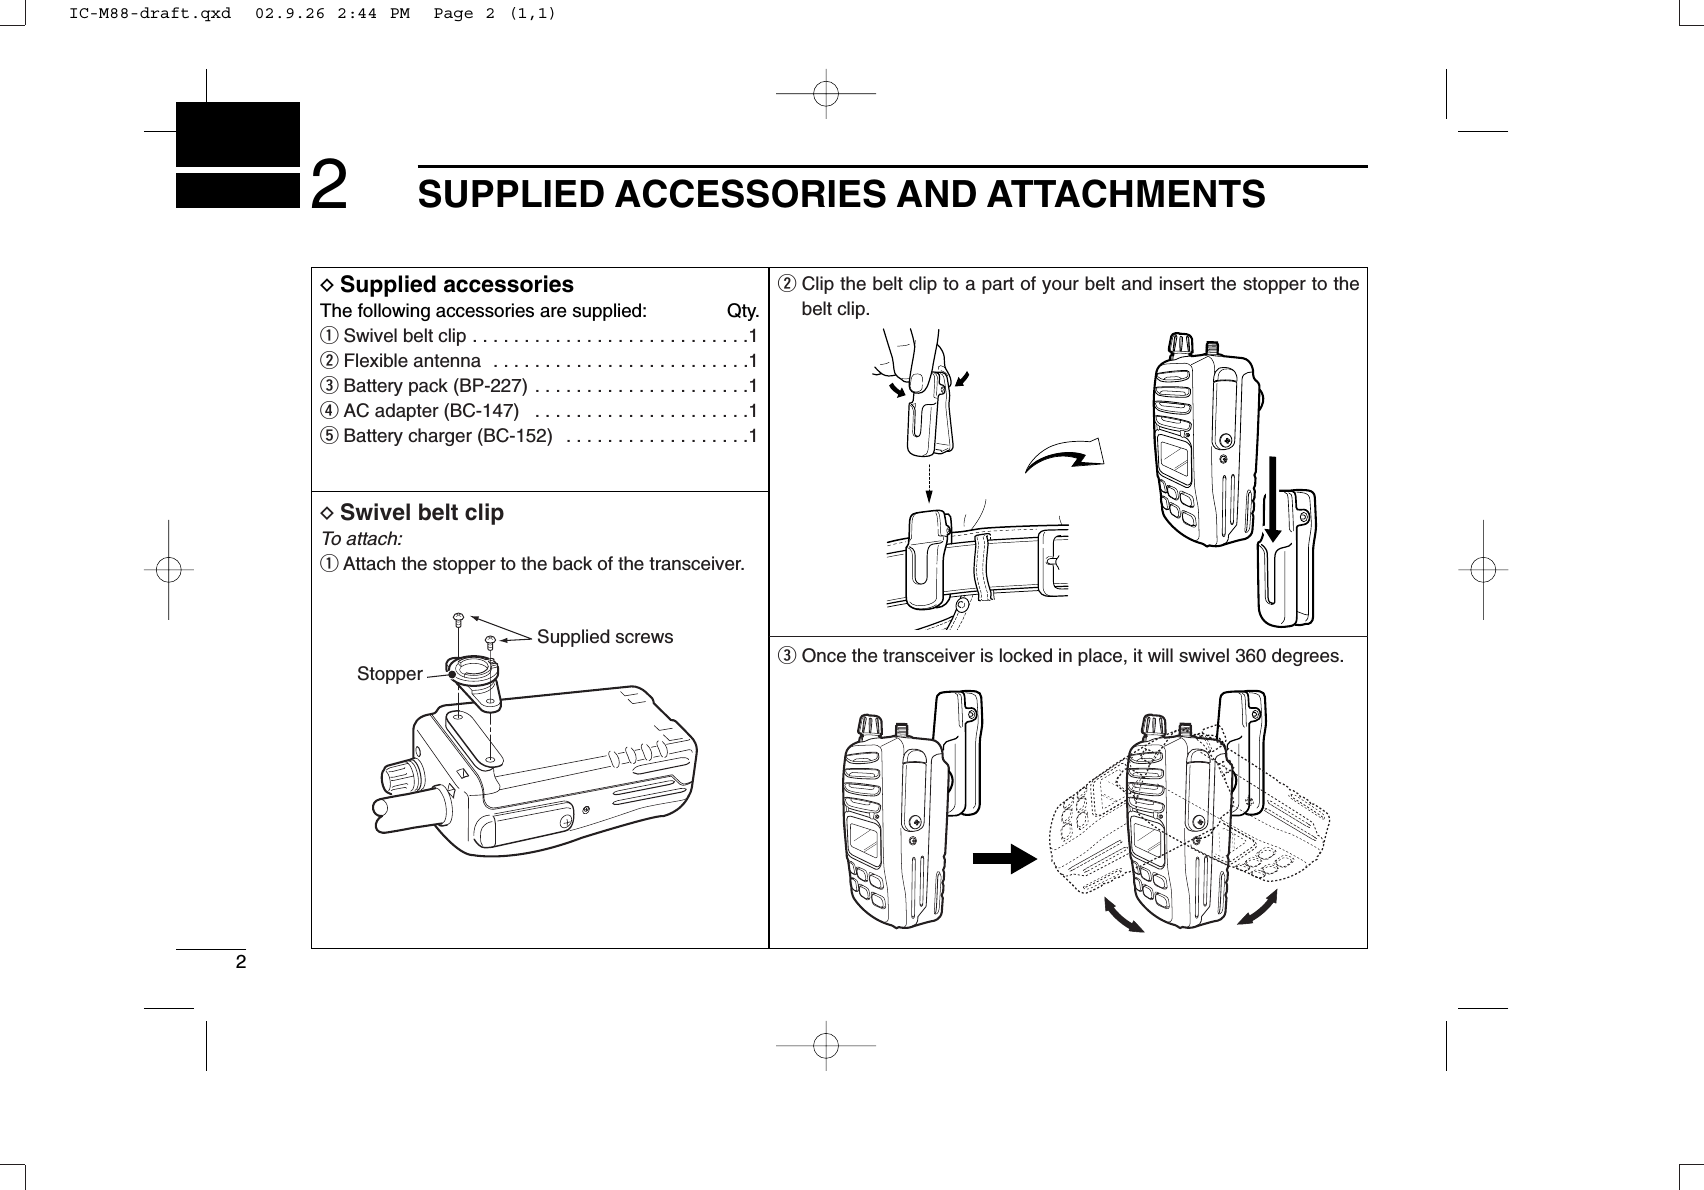 22SUPPLIED ACCESSORIES AND ATTACHMENTSDSupplied accessoriesThe following accessories are supplied: Qty.qSwivel belt clip . . . . . . . . . . . . . . . . . . . . . . . . . . .1wFlexible antenna  . . . . . . . . . . . . . . . . . . . . . . . . .1eBattery pack (BP-227) . . . . . . . . . . . . . . . . . . . . .1rAC adapter (BC-147)  . . . . . . . . . . . . . . . . . . . . .1tBattery charger (BC-152)  . . . . . . . . . . . . . . . . . .1DSwivel belt clipTo attach:qAttach the stopper to the back of the transceiver.wClip the belt clip to a part of your belt and insert the stopper to thebelt clip.eOnce the transceiver is locked in place, it will swivel 360 degrees.Supplied screwsStopperIC-M88-draft.qxd  02.9.26 2:44 PM  Page 2 (1,1)